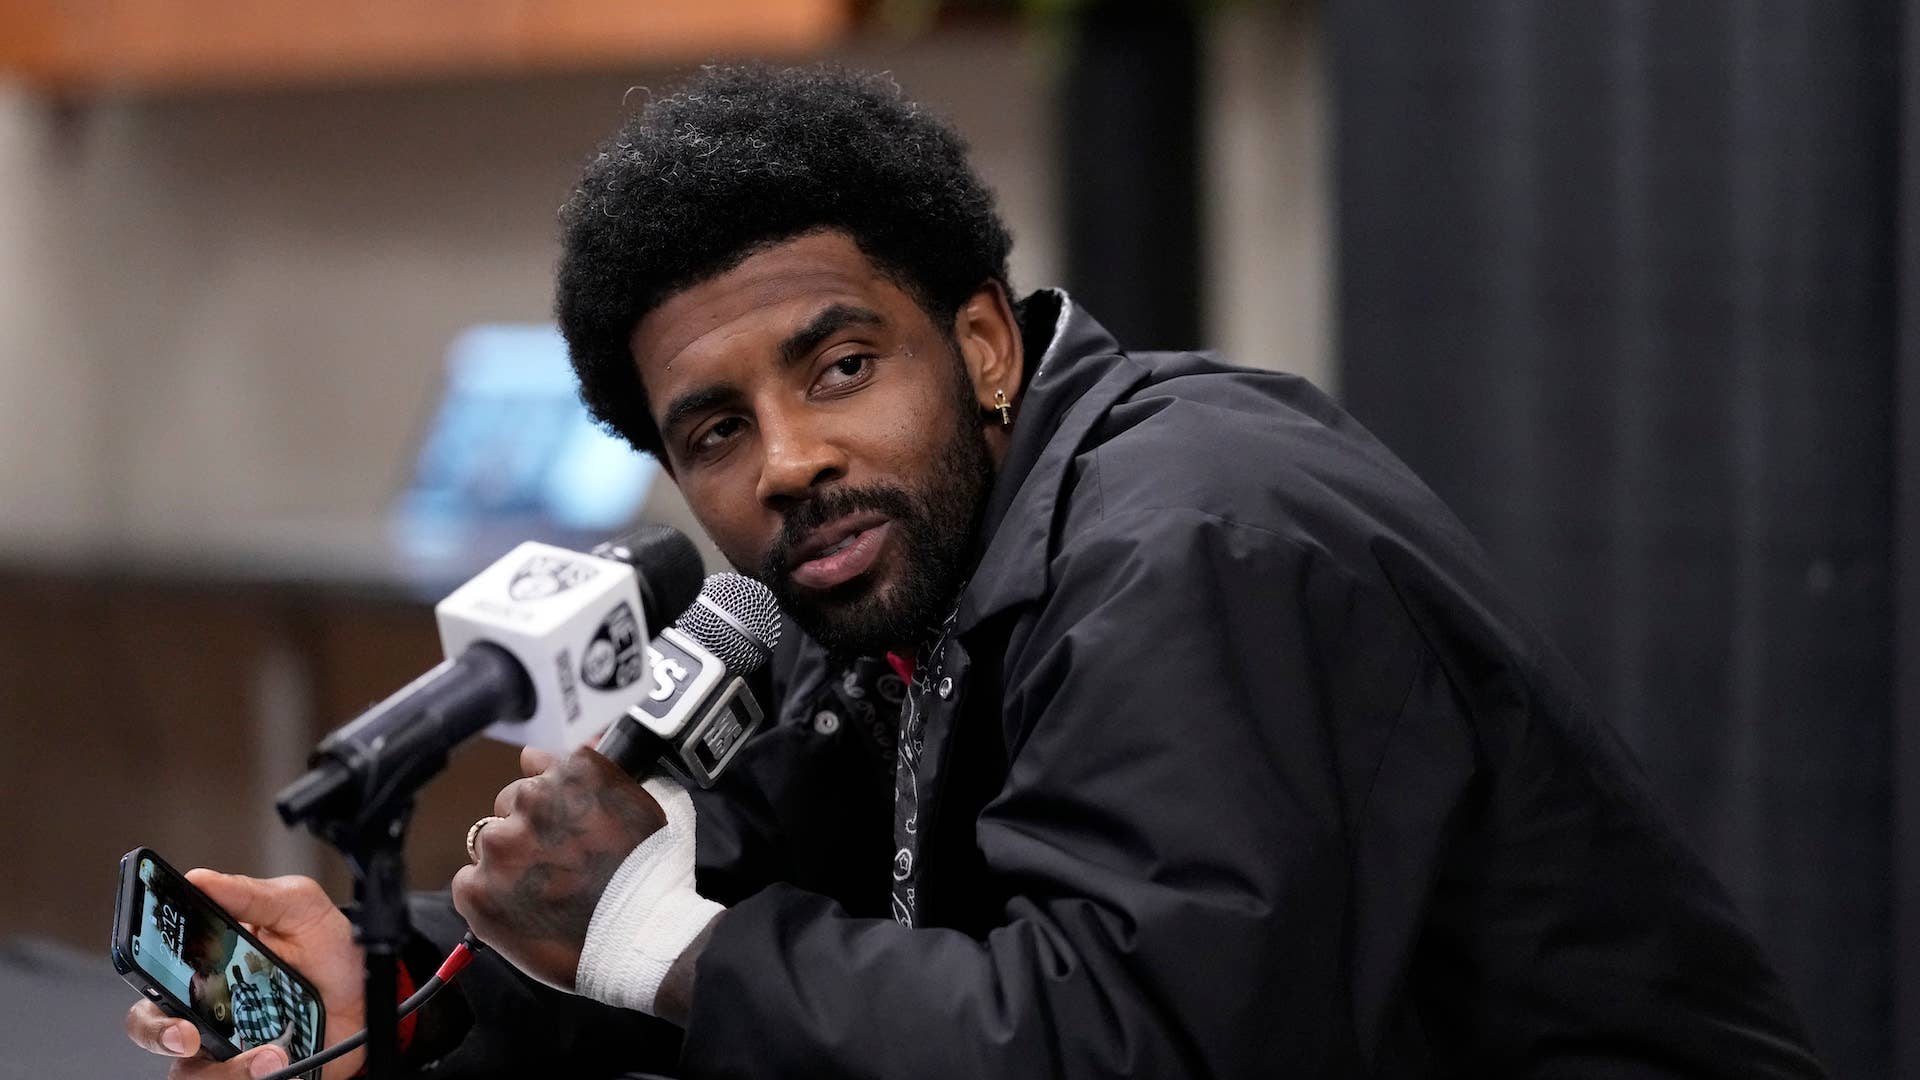 Kyrie Irving #11 of the Brooklyn Nets speaks with the media.